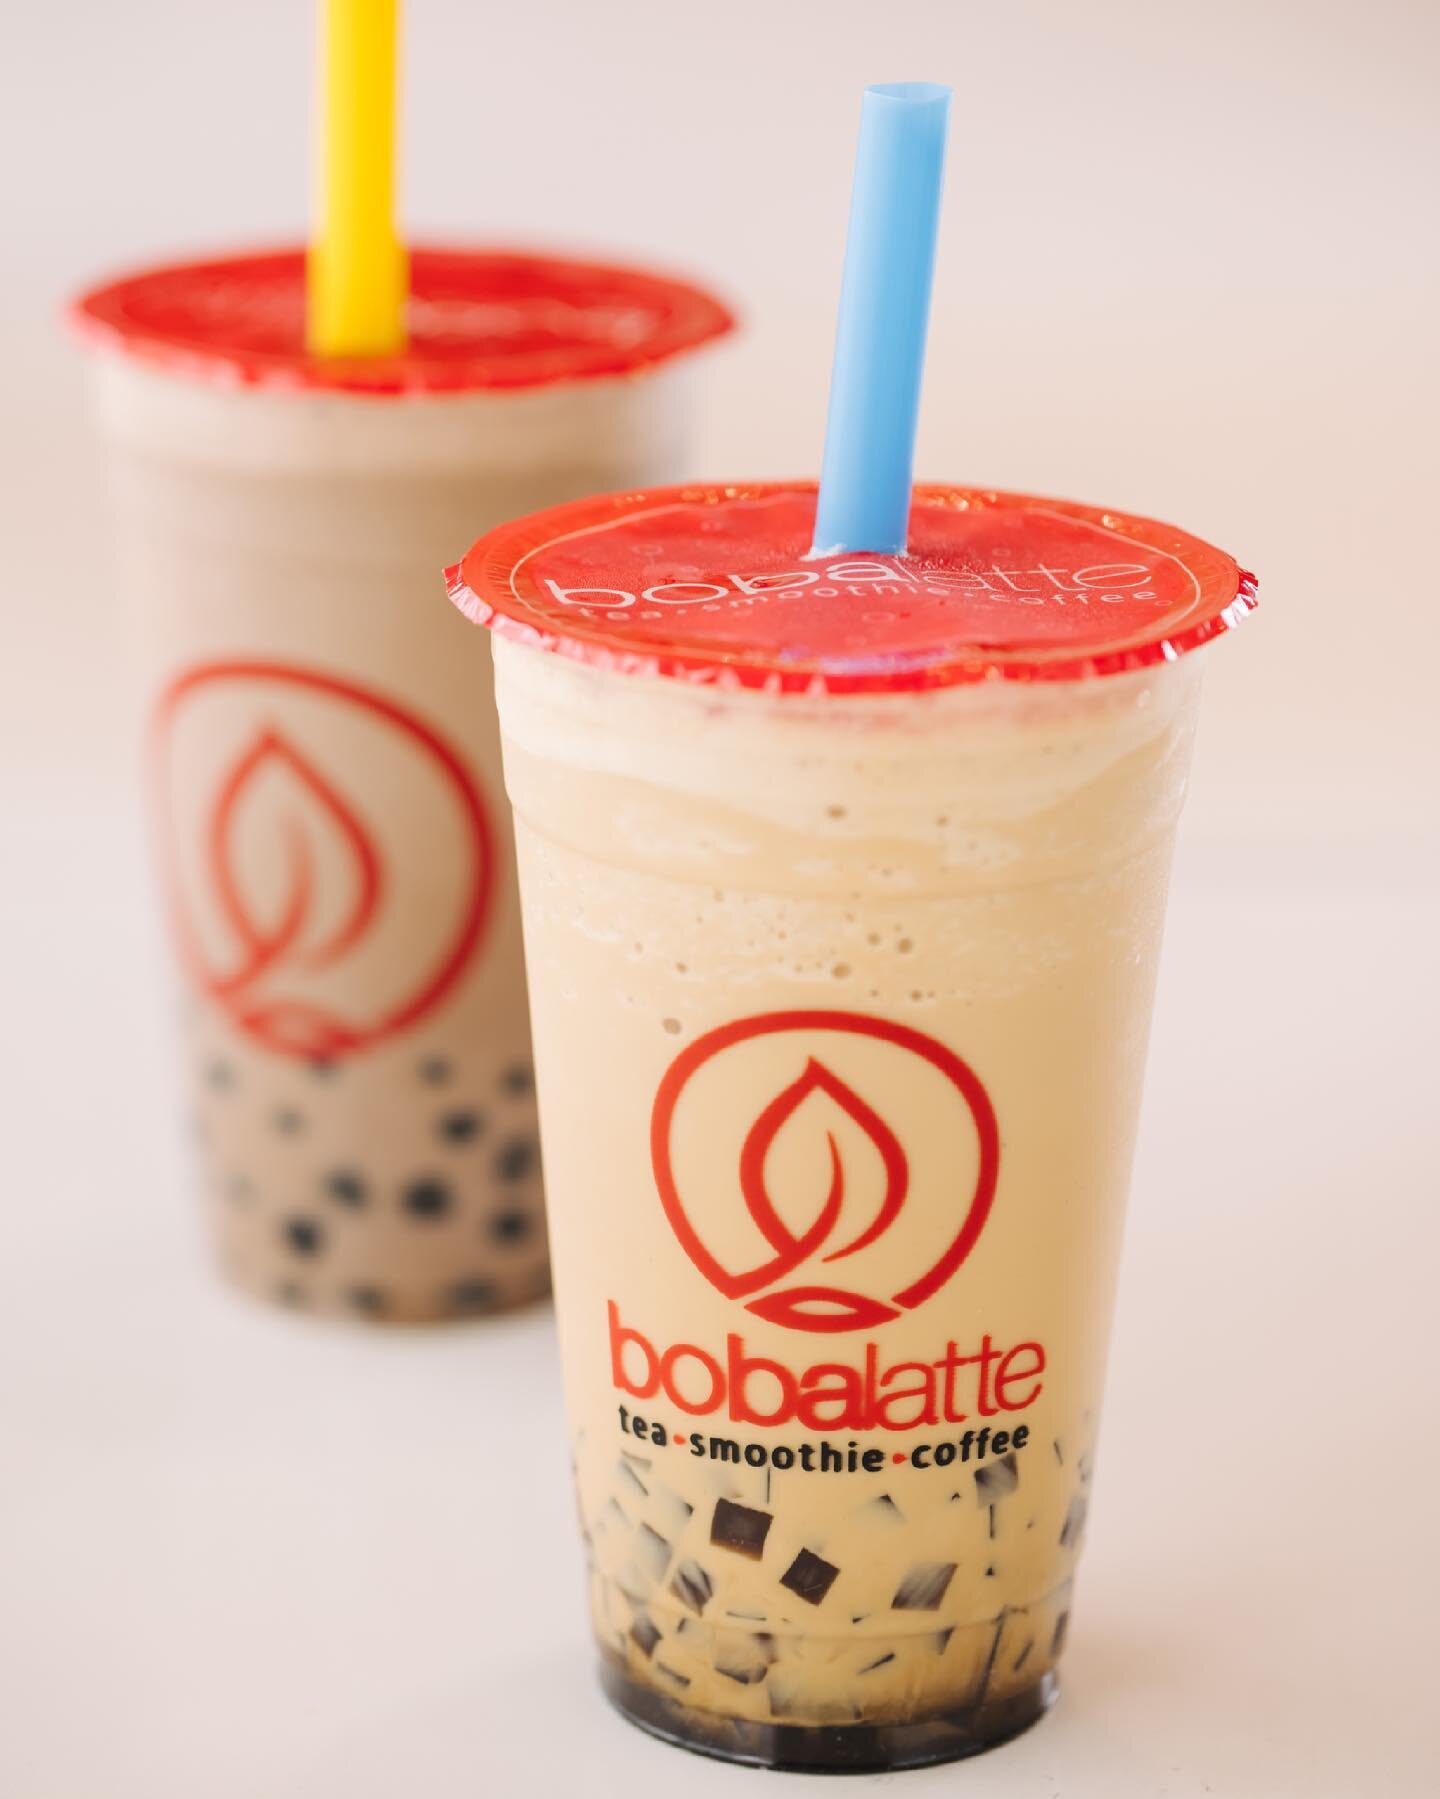 A mid week pick me up with coffee is a must!! ☕️ Stop by Boba Latte for your daily dose of caffeine!

Drink: Coffee Frappe with coffee jelly

.
.
.
#butfirstcoffee #coffeetime #midweek #pickmeup #boba #bobatea #bobalatte